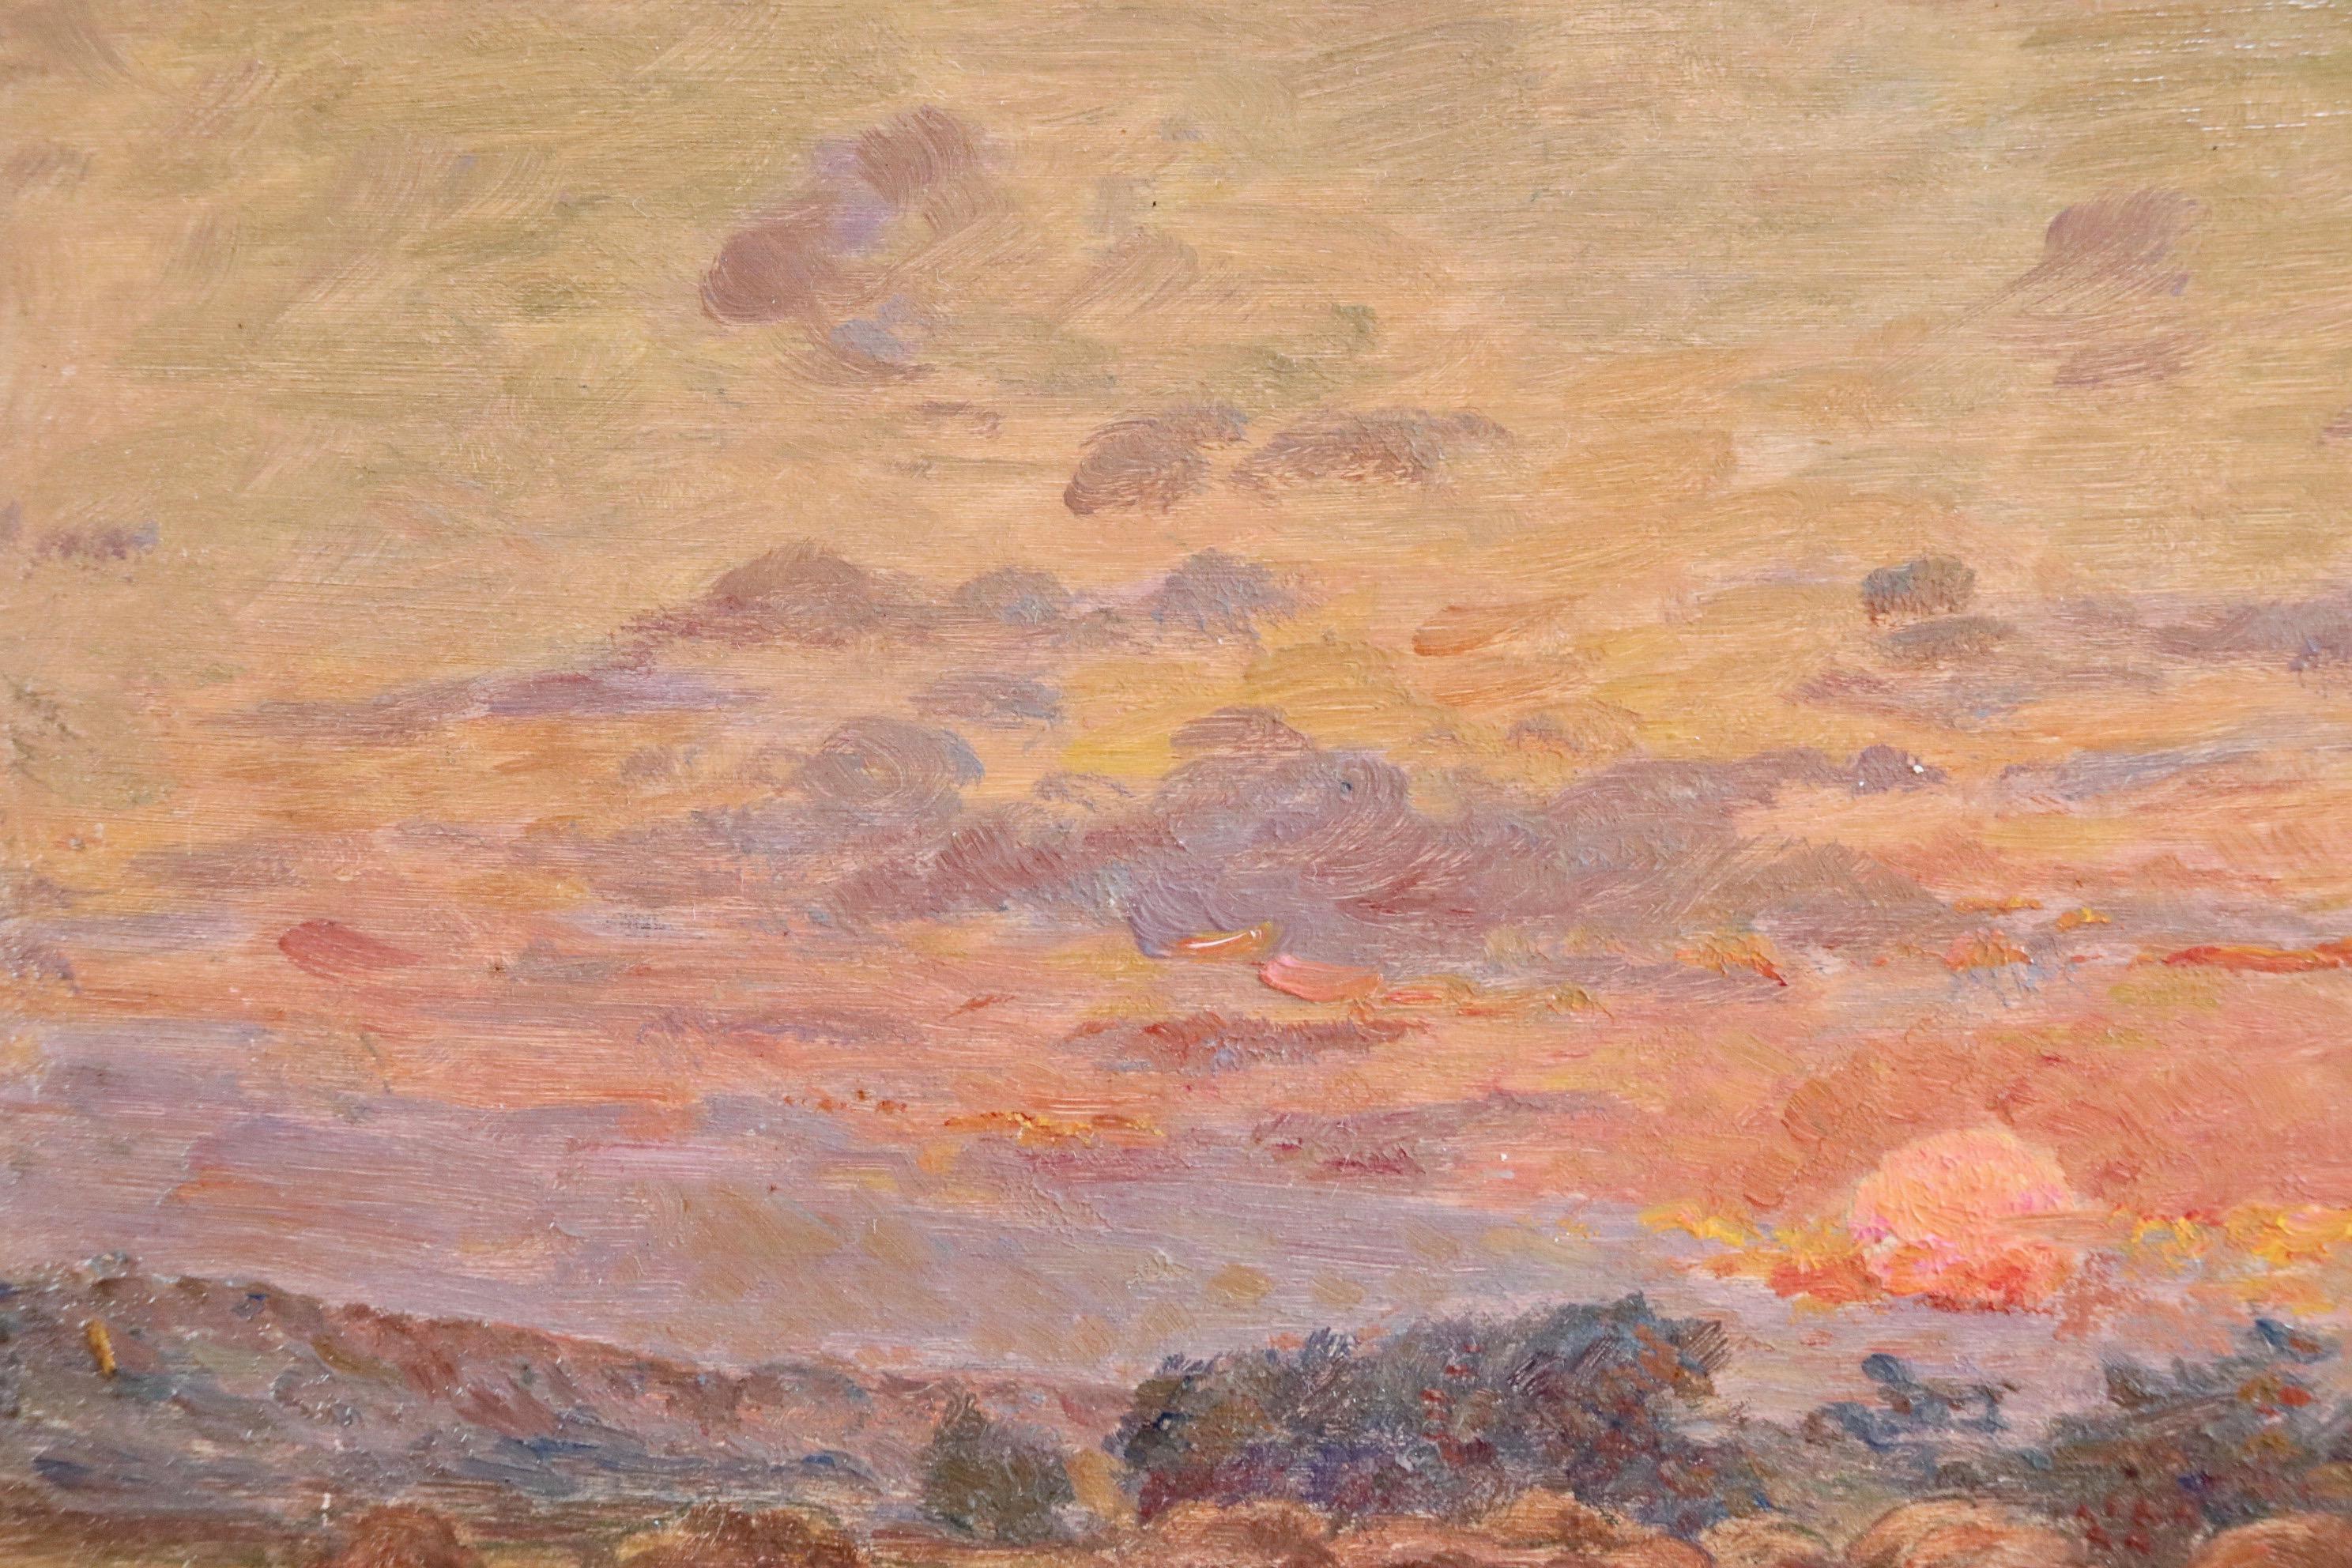 Oil on panel by Henri Duhem depicting haystacks in a field with the setting sun in the distance. Signed  lower left and dated 1909 verso. This painting is not currently framed but a suitable frame can be sourced if required.

Descendant of an old